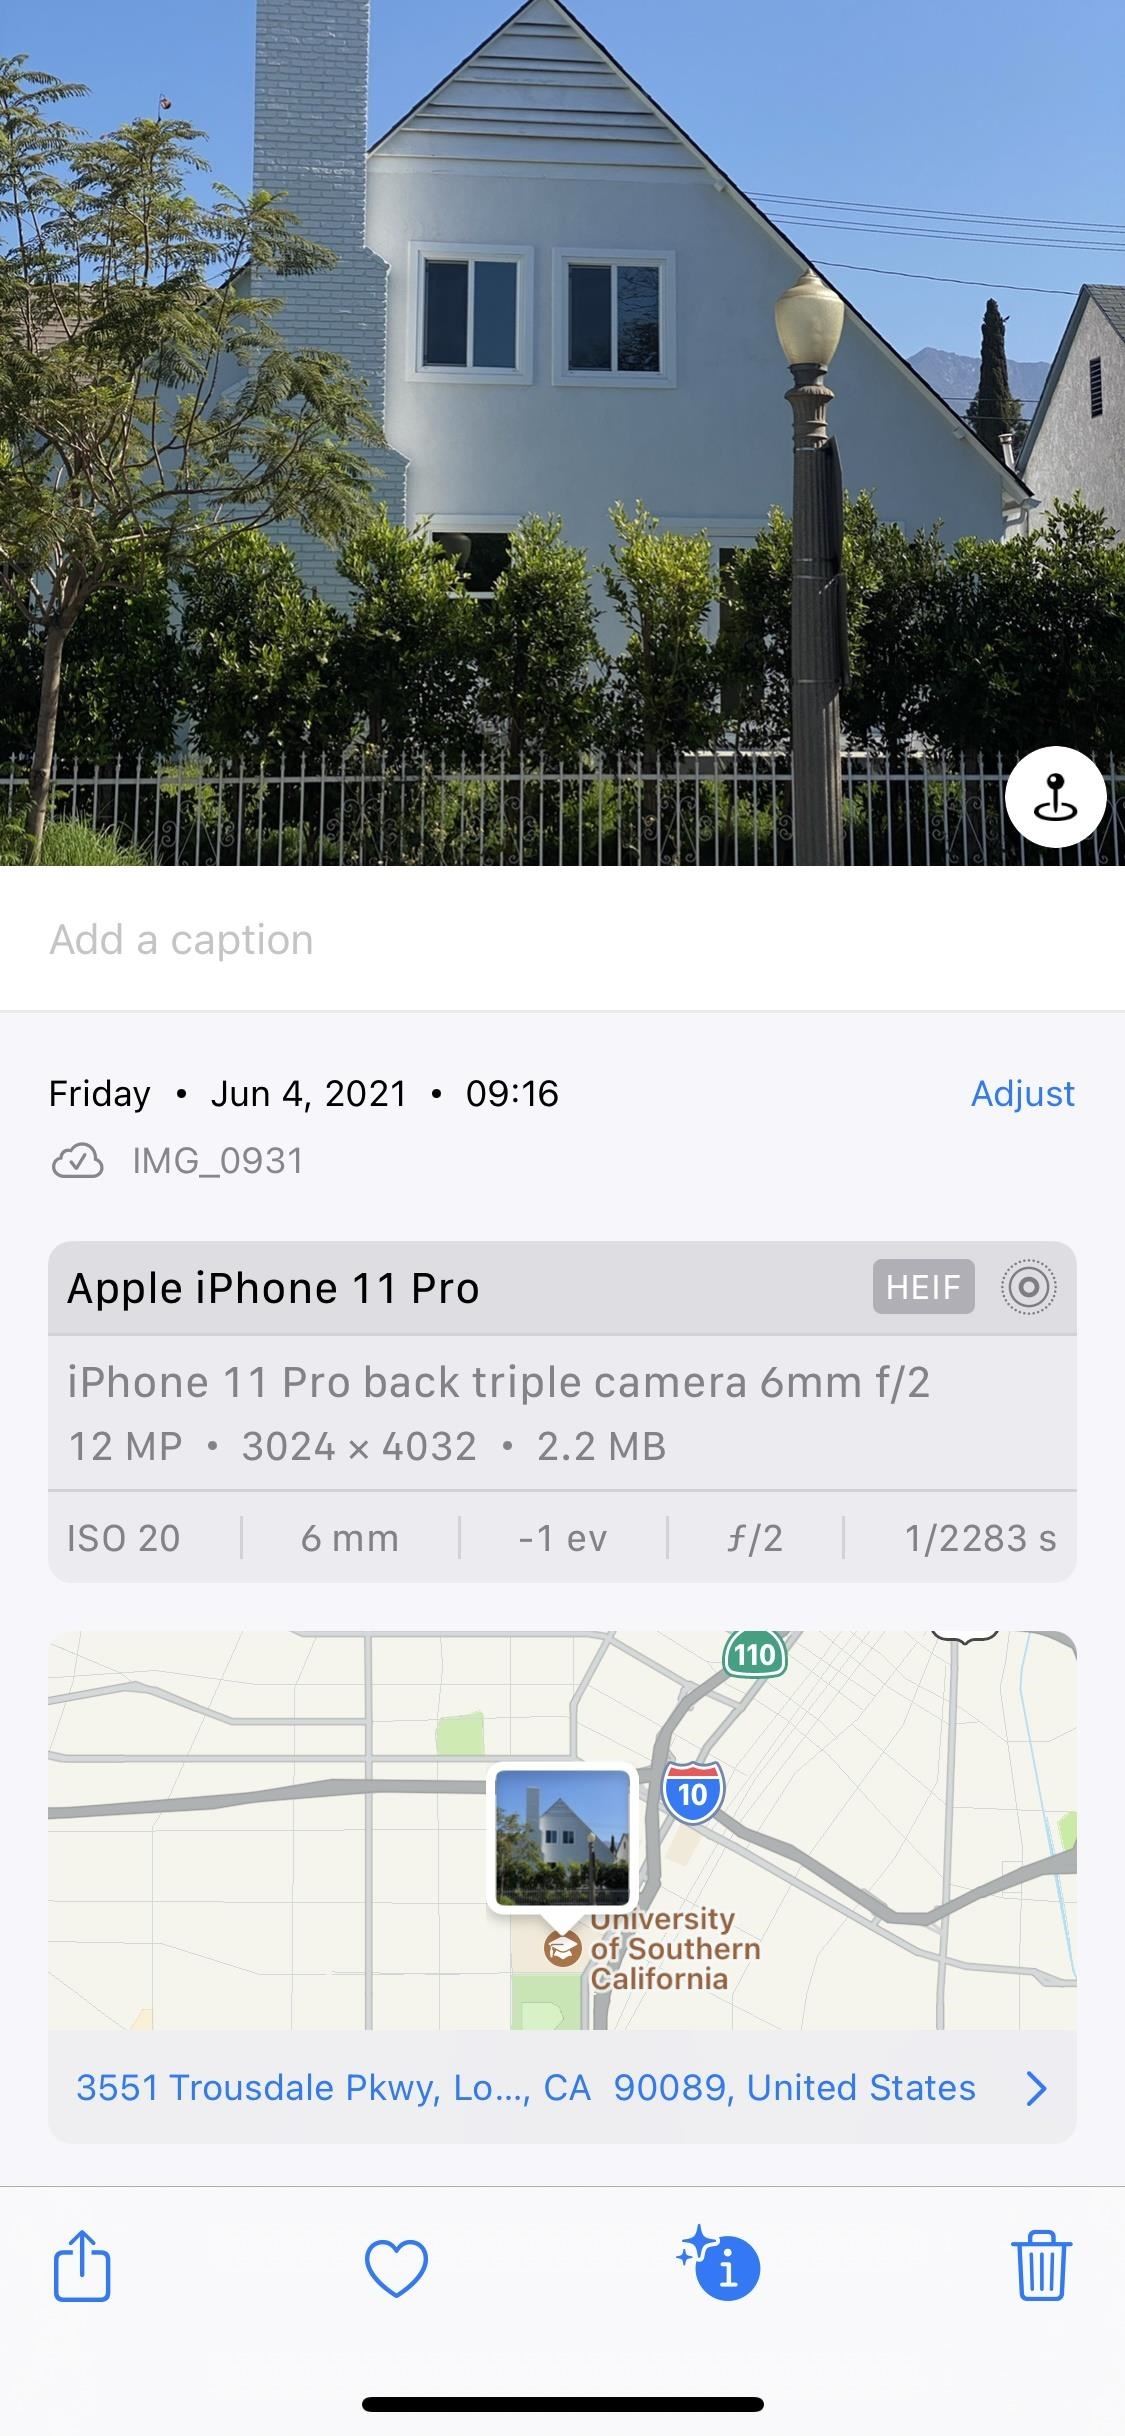 iOS 15 Makes It Really Easy to Change the Location & Date/Time for Any Photo or Video